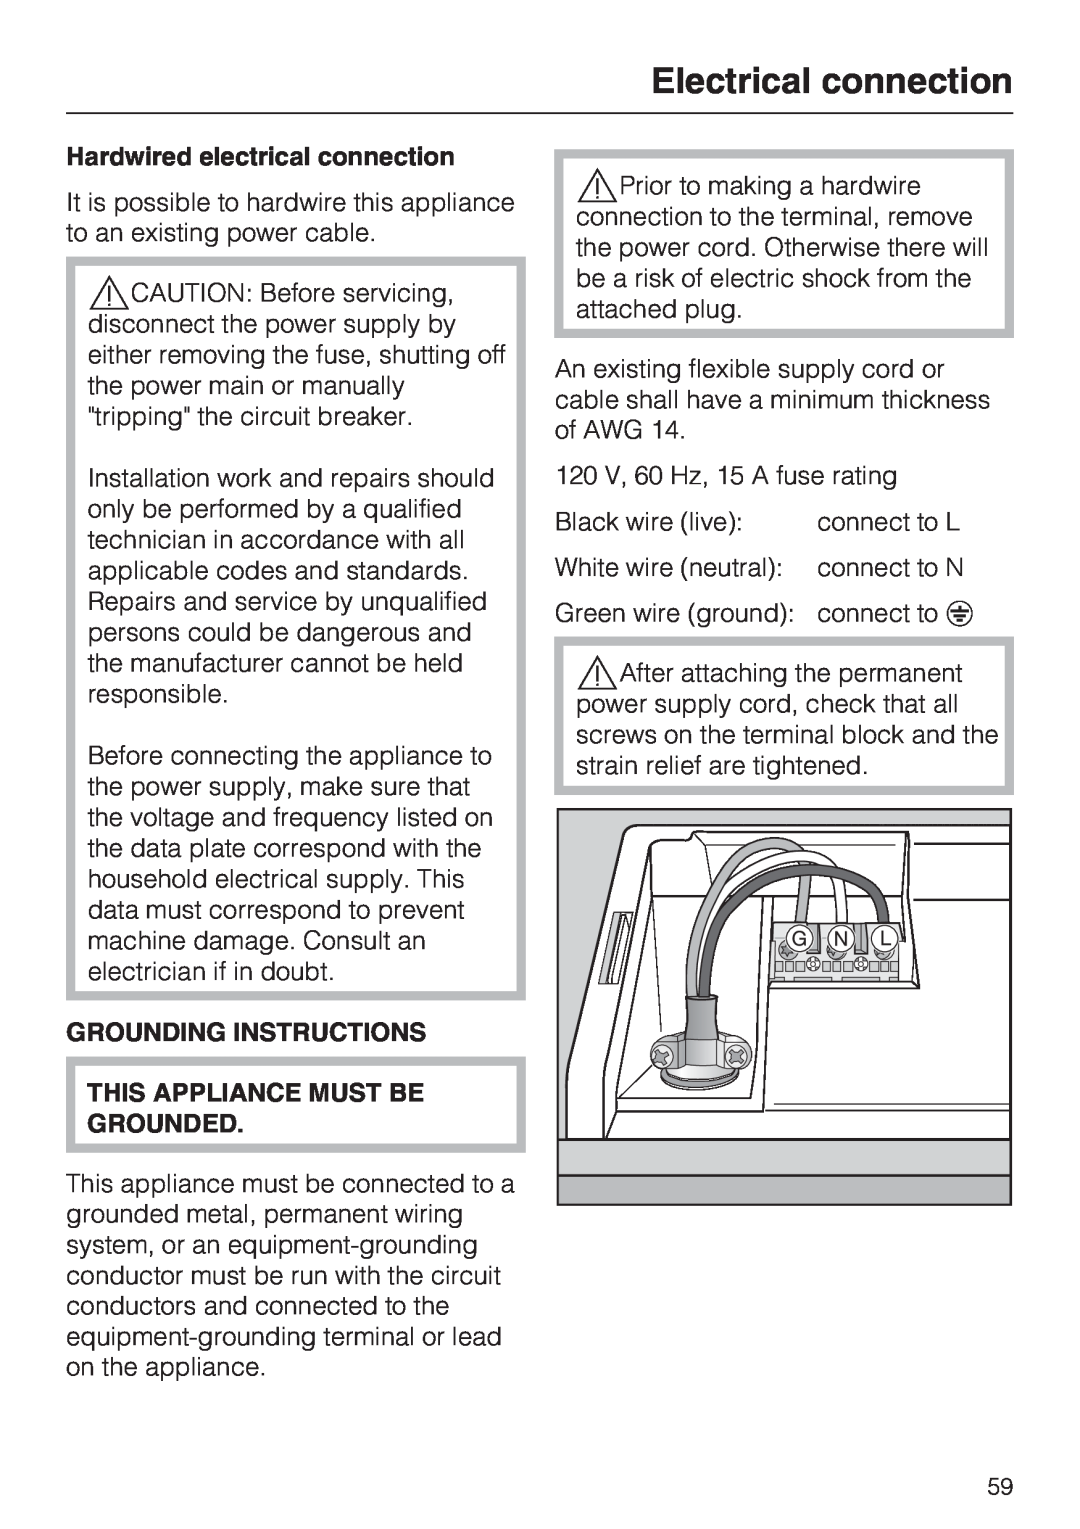 Miele G 5280, G 5285 manual Electrical connection, Hardwired electrical connection, Grounding Instructions 